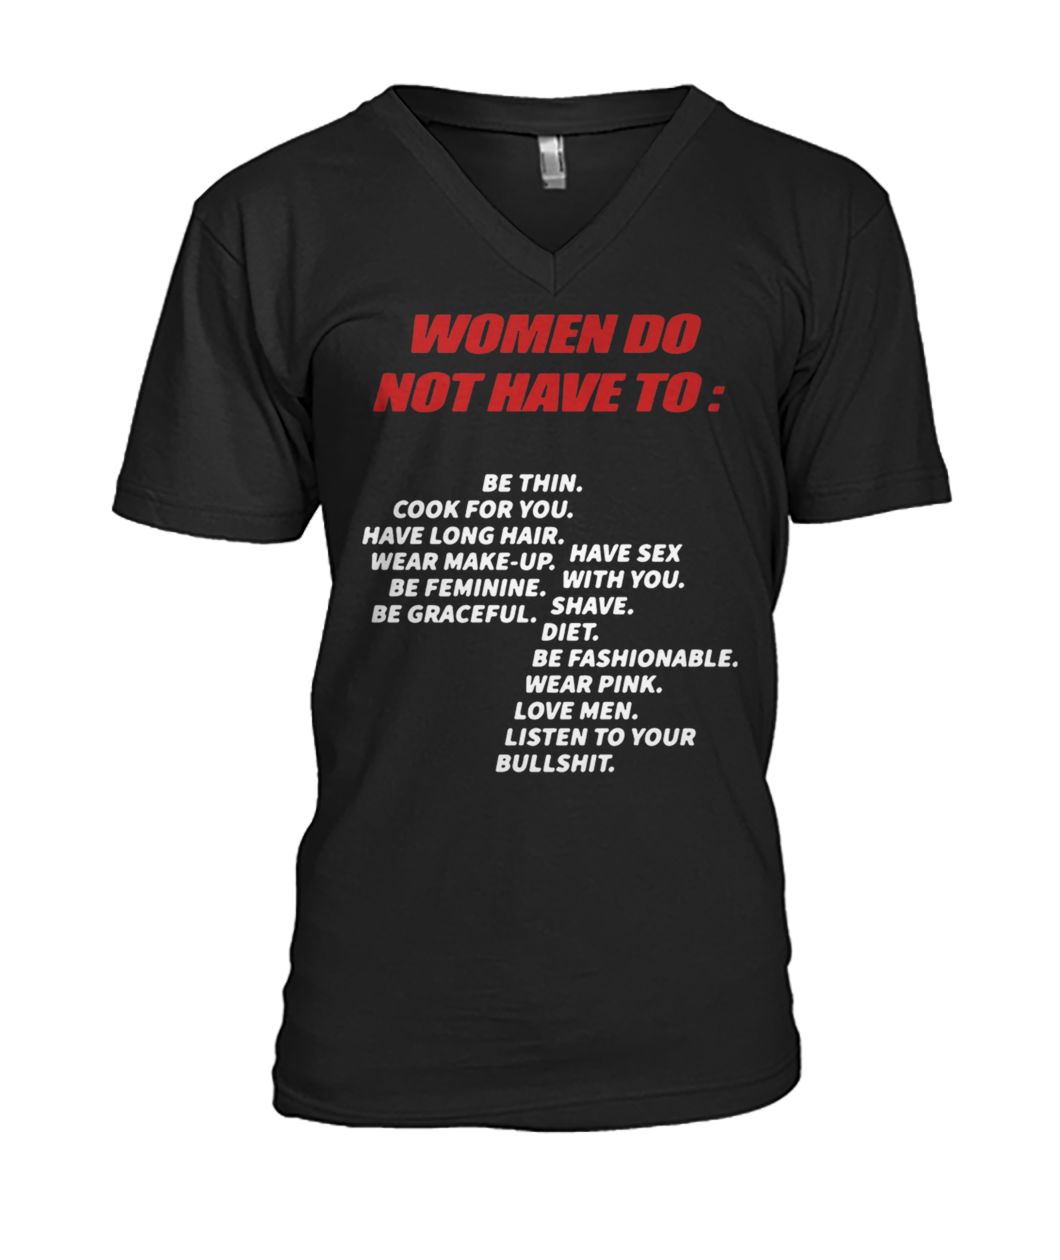 Women do not have to be thin cook for you listen to your bullshit mens v-neck